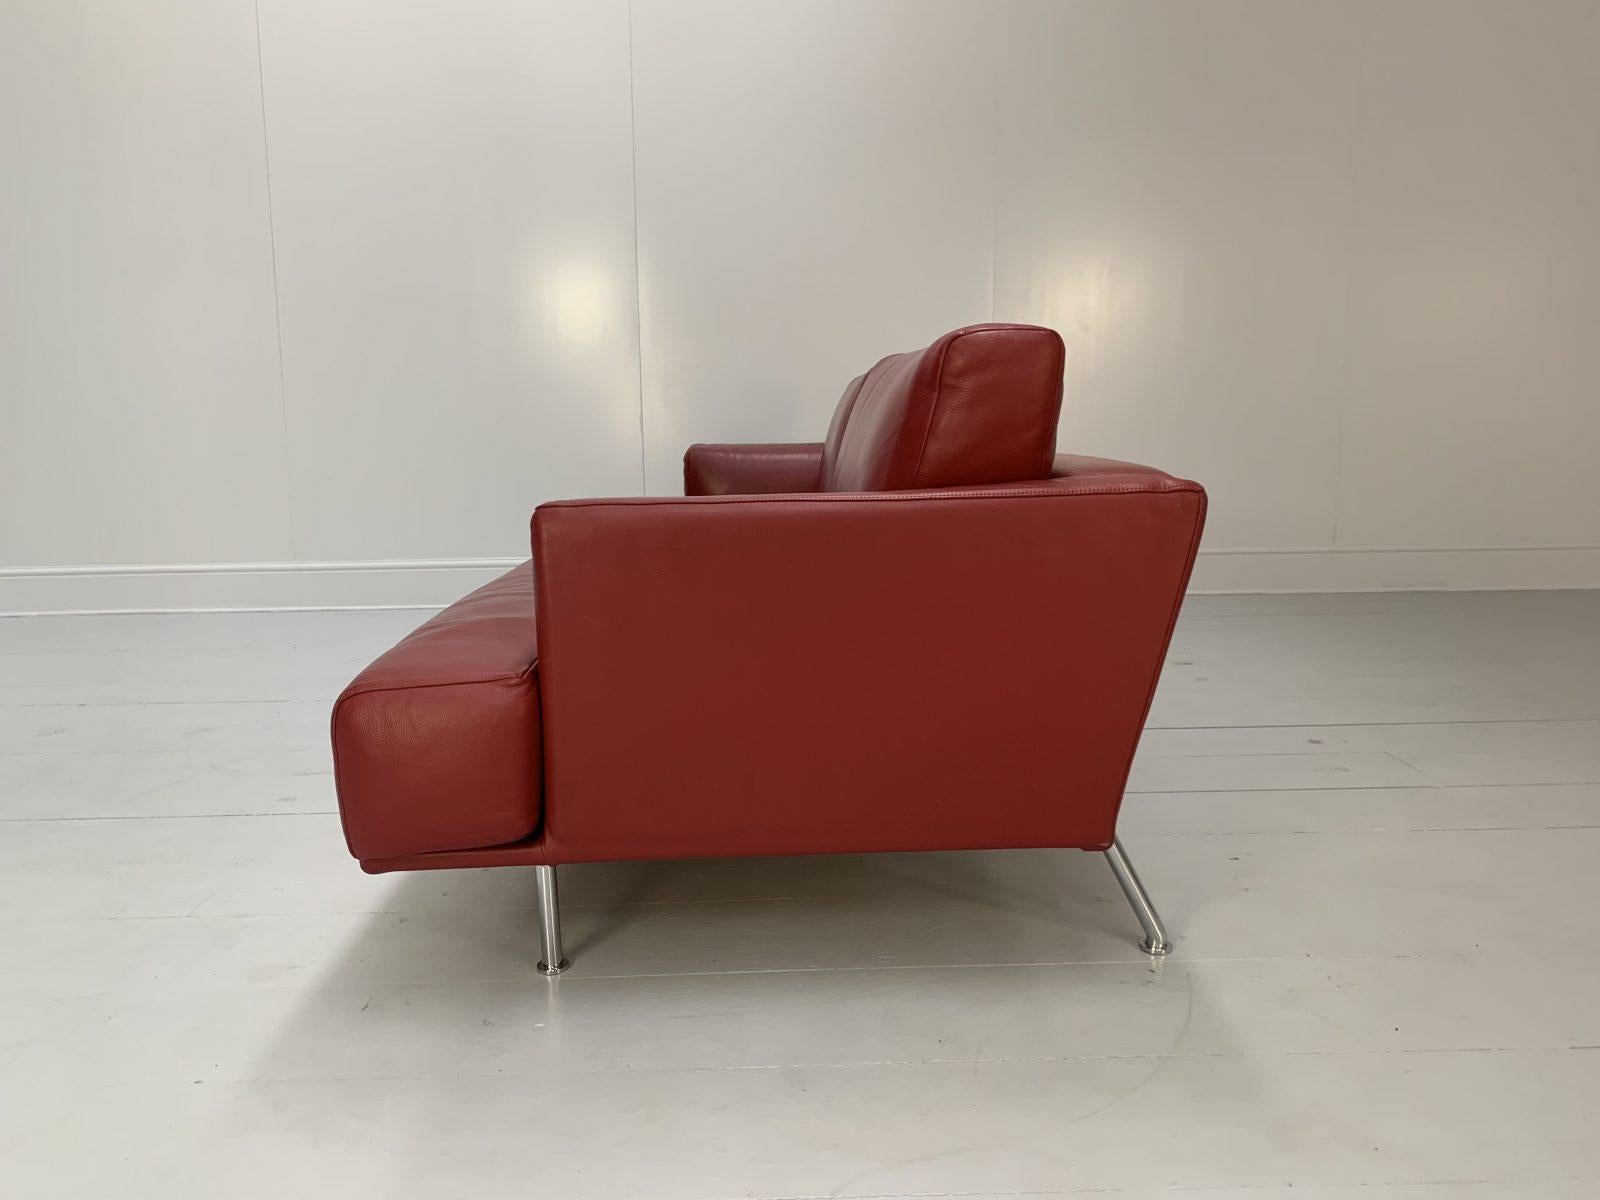 Cassina “253 Nest” 2.5-Seat Sofa & Bench Footstool – In Red “Pelle” Leather 7